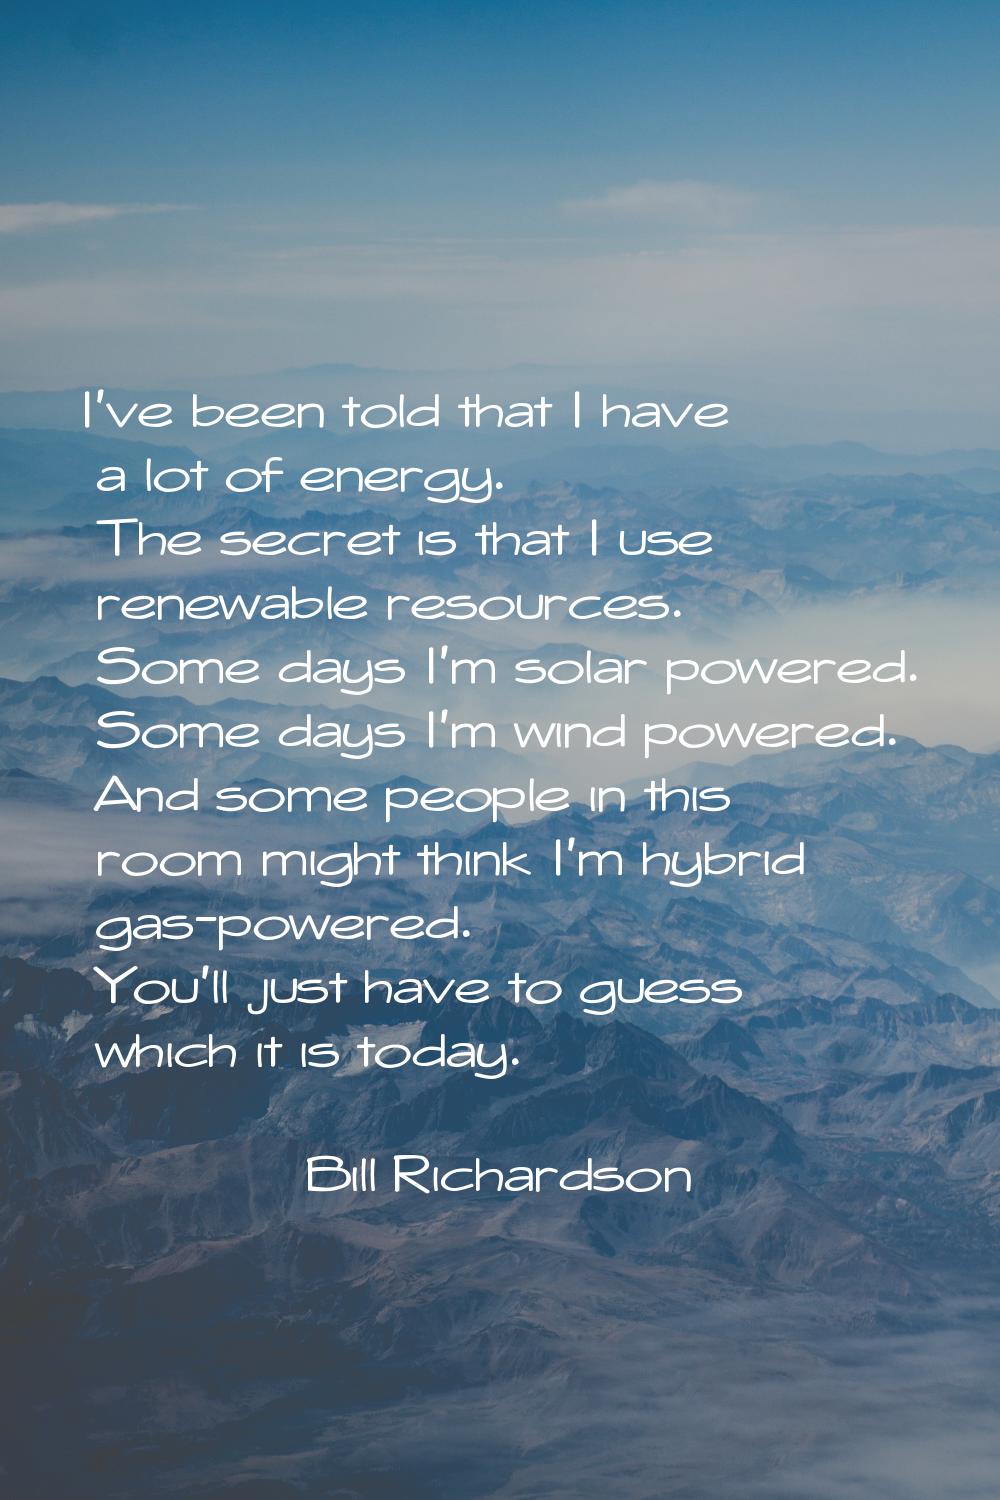 I've been told that I have a lot of energy. The secret is that I use renewable resources. Some days